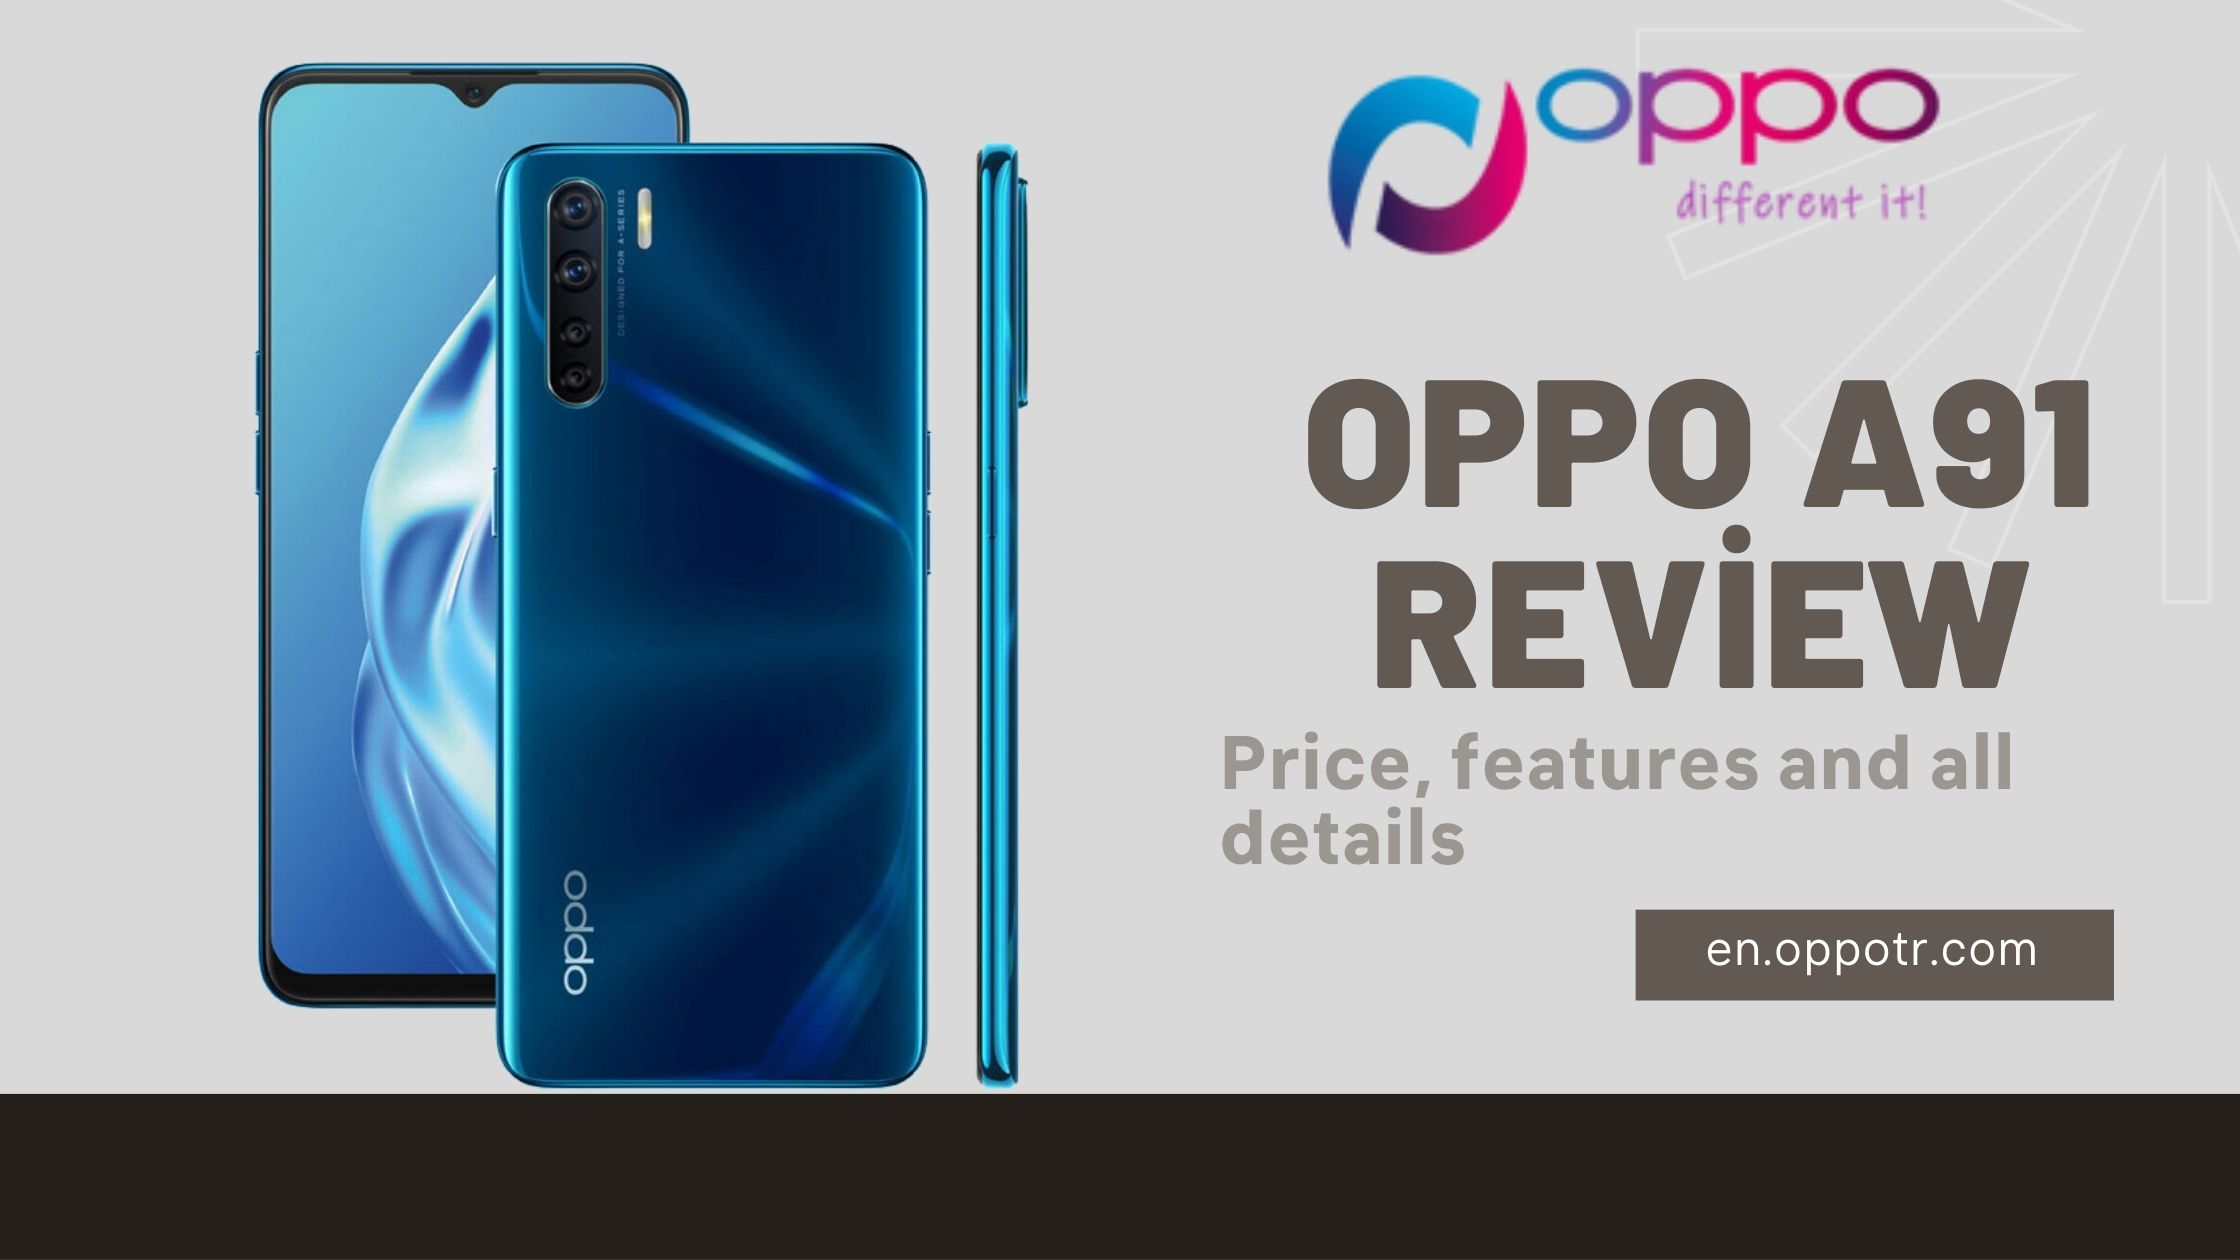 Oppo A91 Review: A Comprehensive Look at its Features and Performance